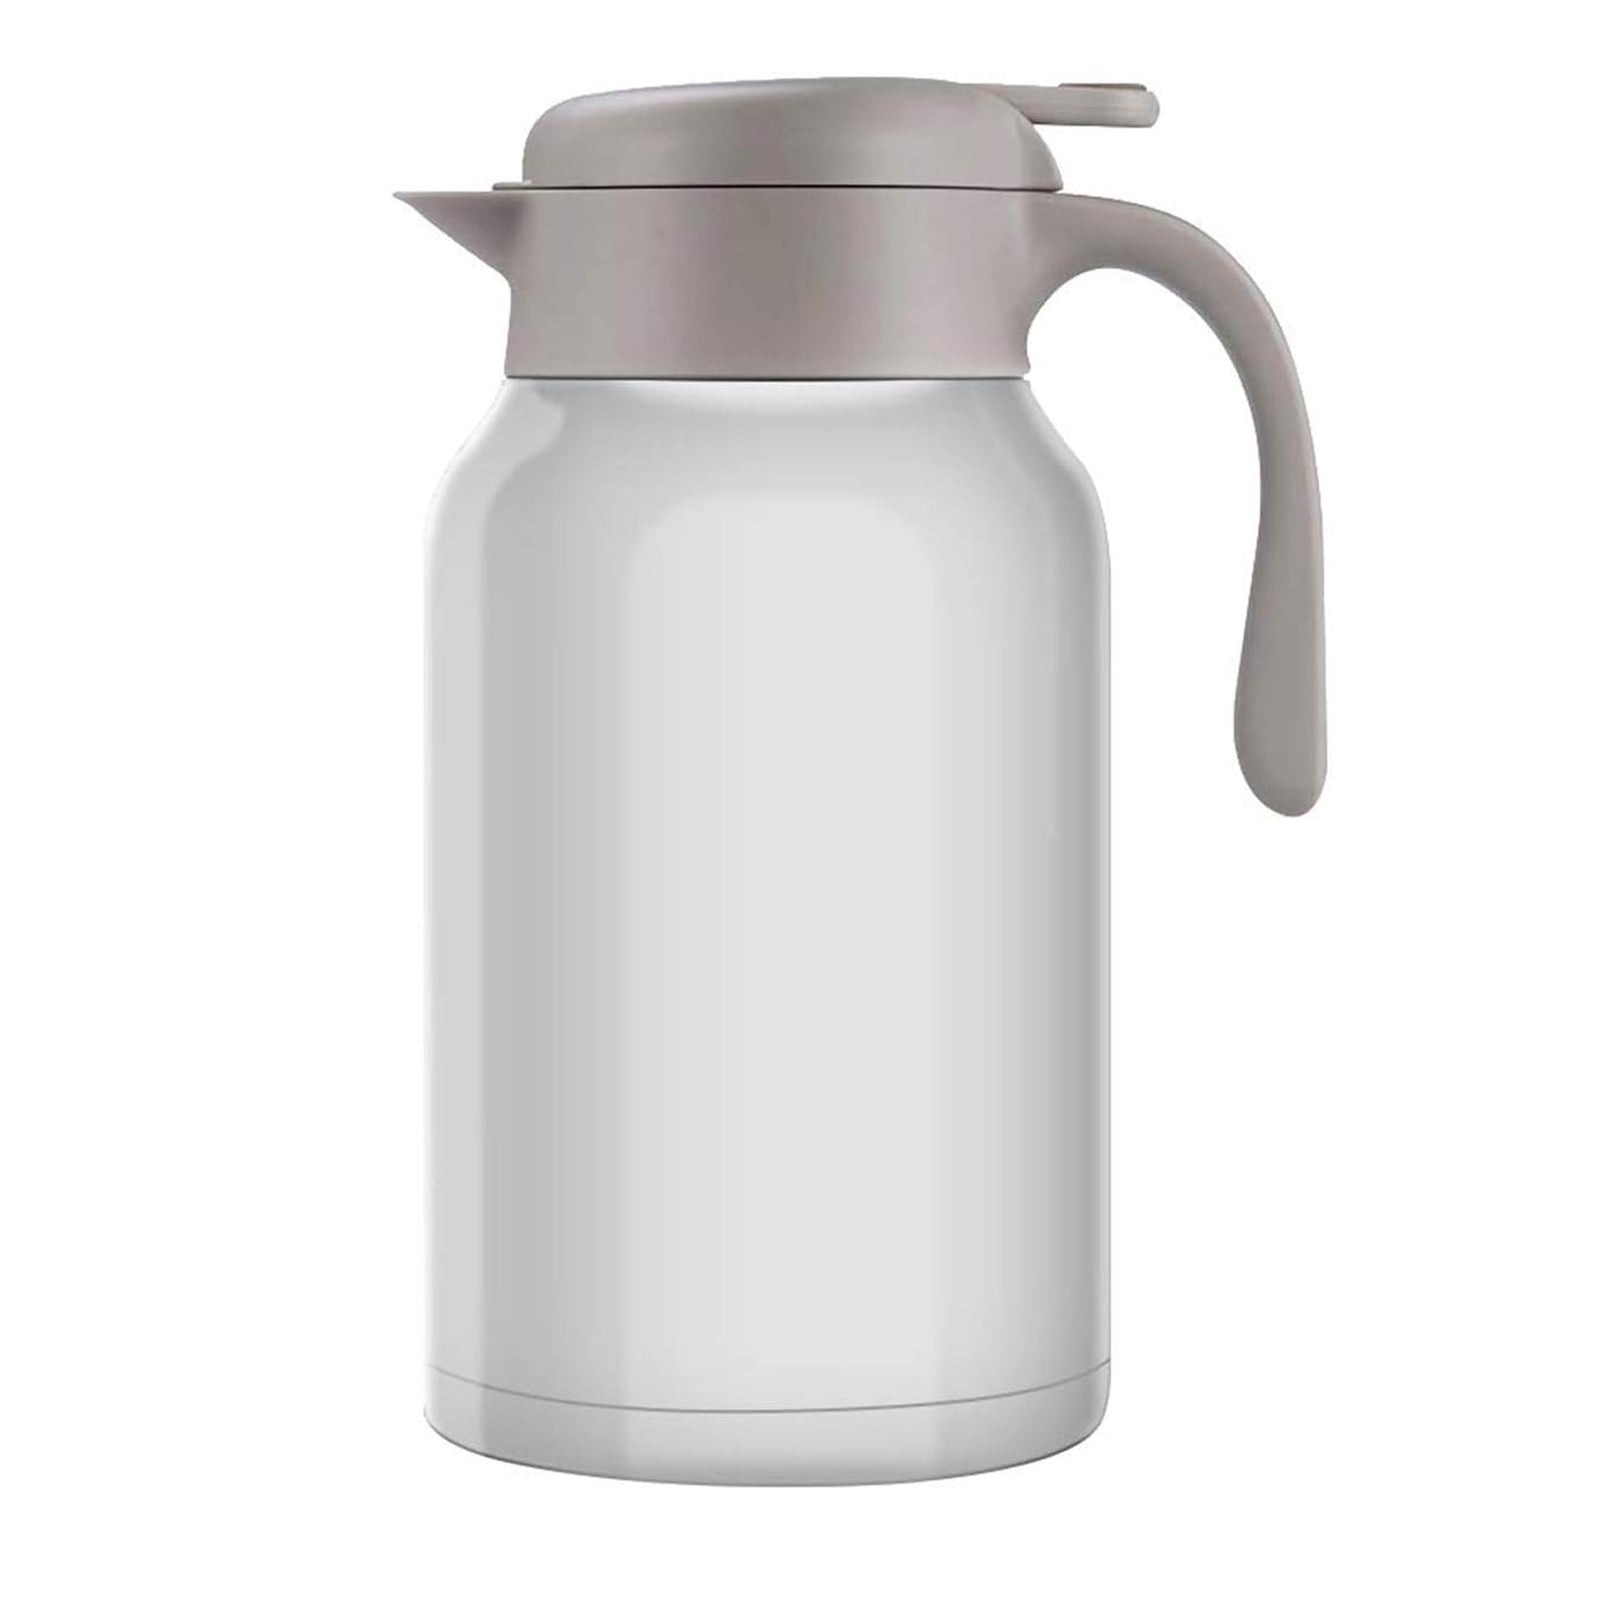  German-Designed 68 Oz (2 Liter) Thermal Coffee Carafe, Stainless Steel Insulated Double Wall